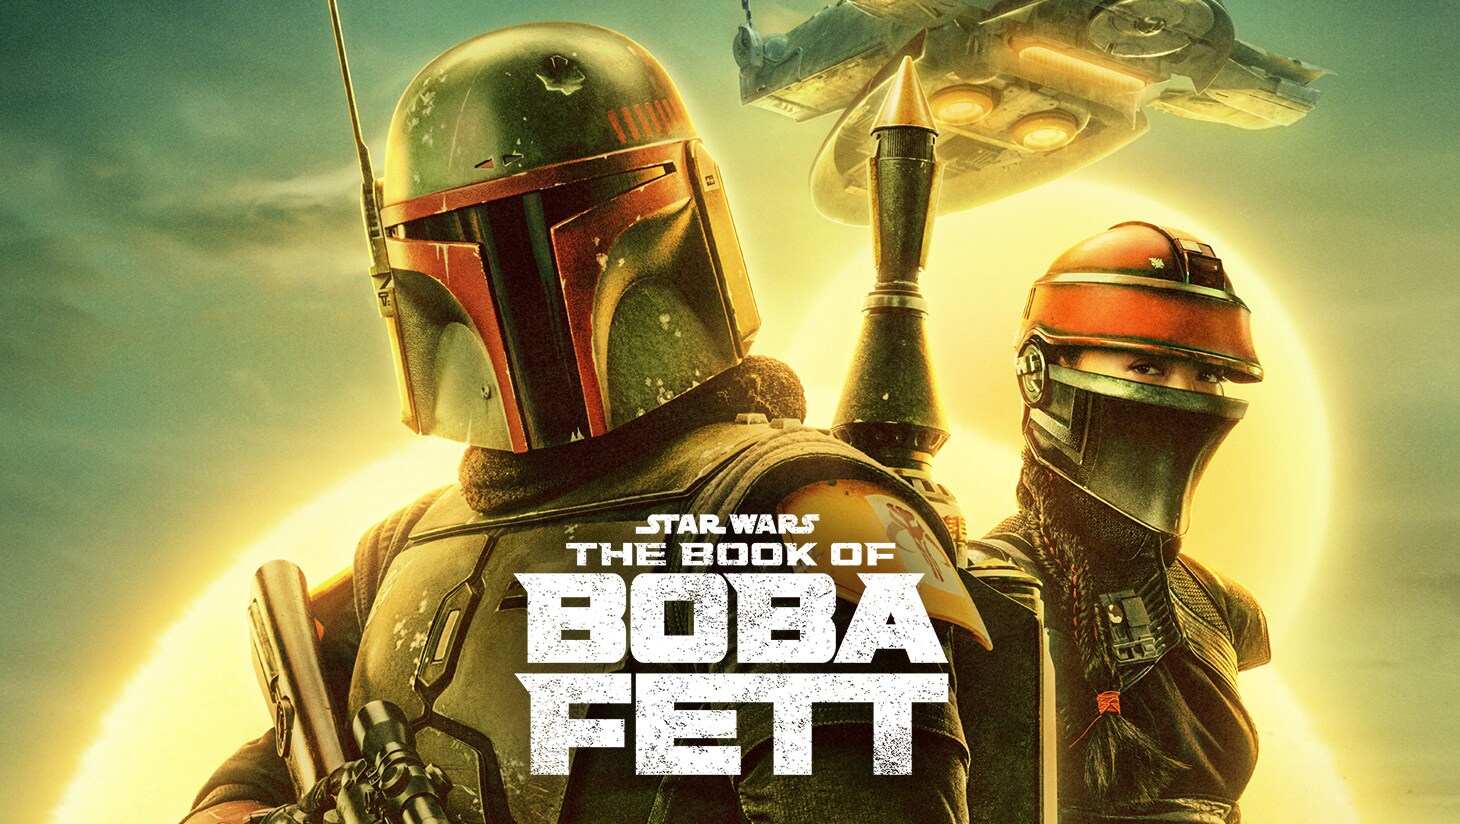 Actors Temuera Morrison as Boba Fett and Ming-Na Wen as Fennec Shand wear armour and stand in front of a sun with Boba's ship in the background